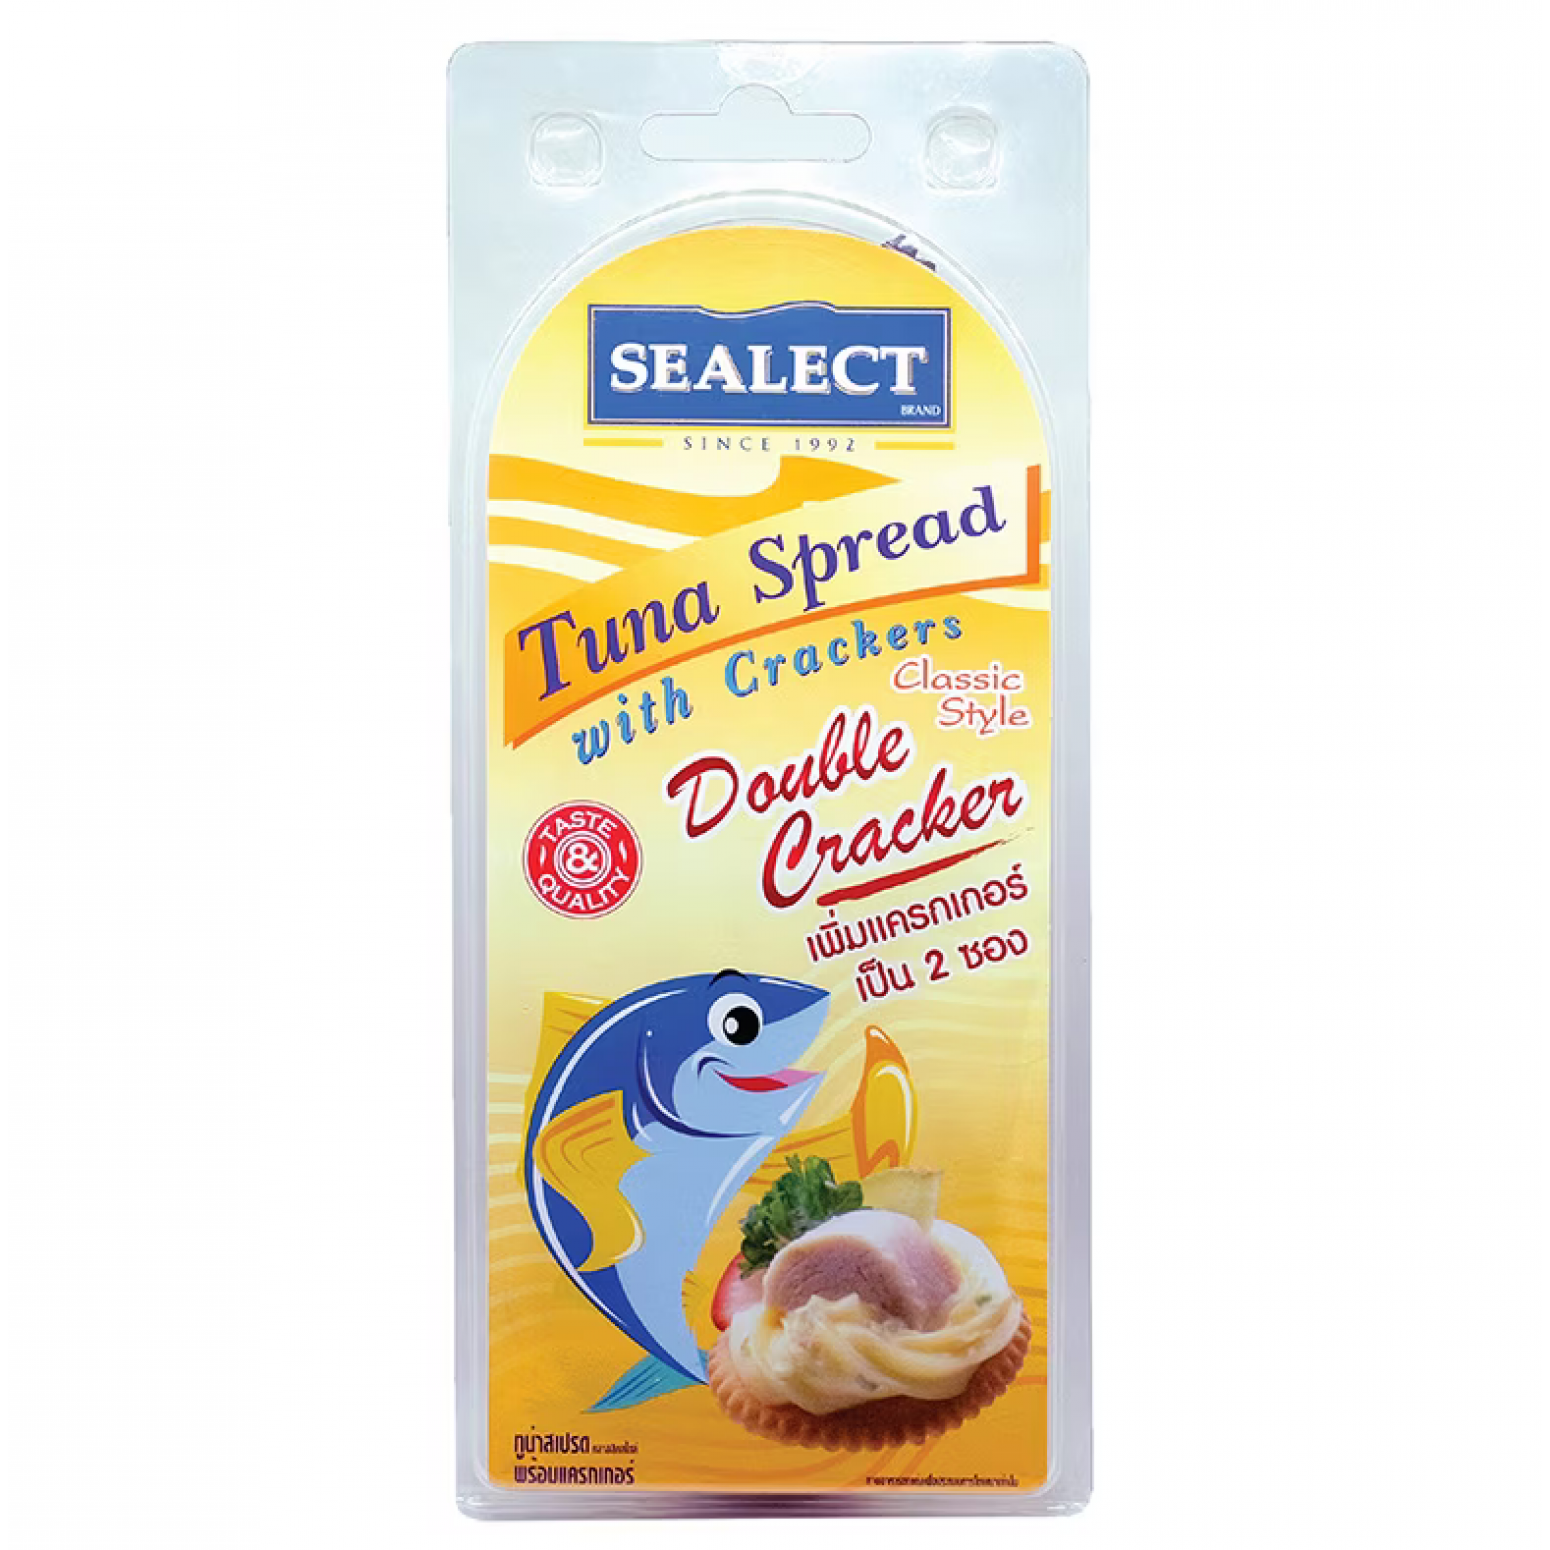 Sealect Tuna Spread with Crackers Classic Style 85g.